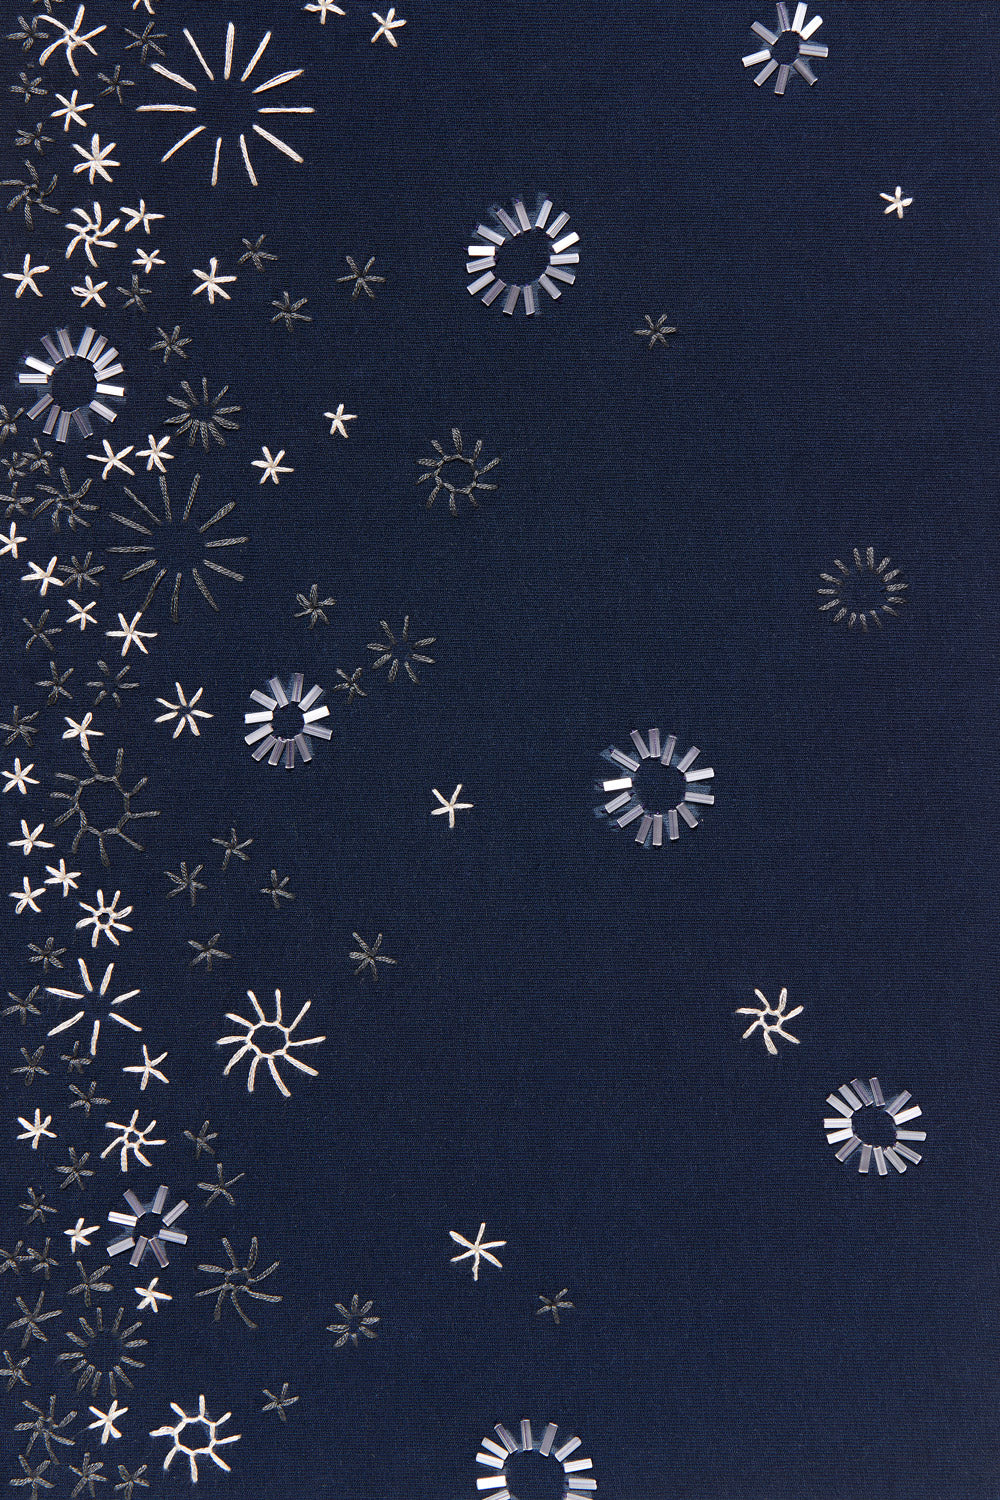 The School of Making fabric swatch in navy with Eyelet embroidery beading.